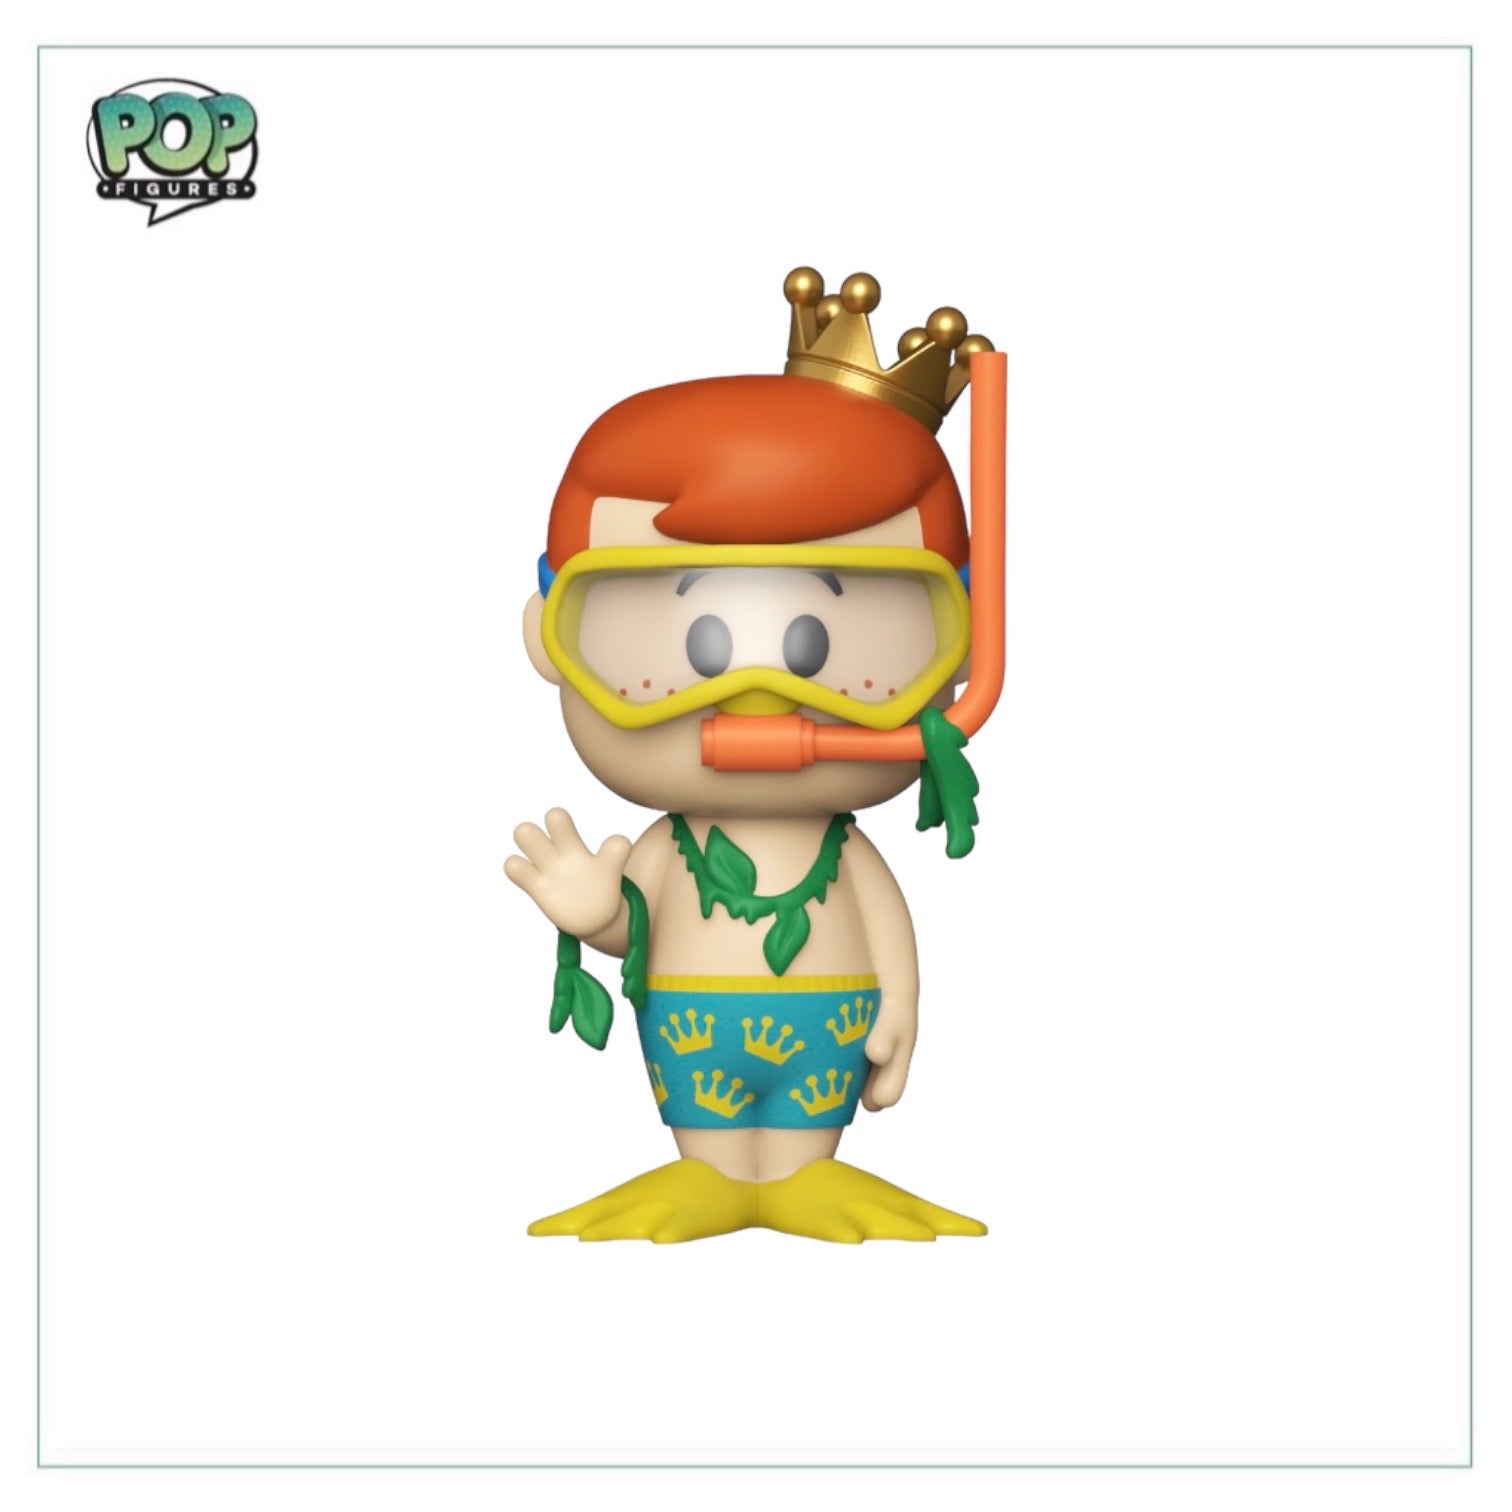 Snorkel Freddy Funko Soda Vinyl Figure! - SDCC 2023 Shared Exclusive LE13000 Pcs - Chance of Chase